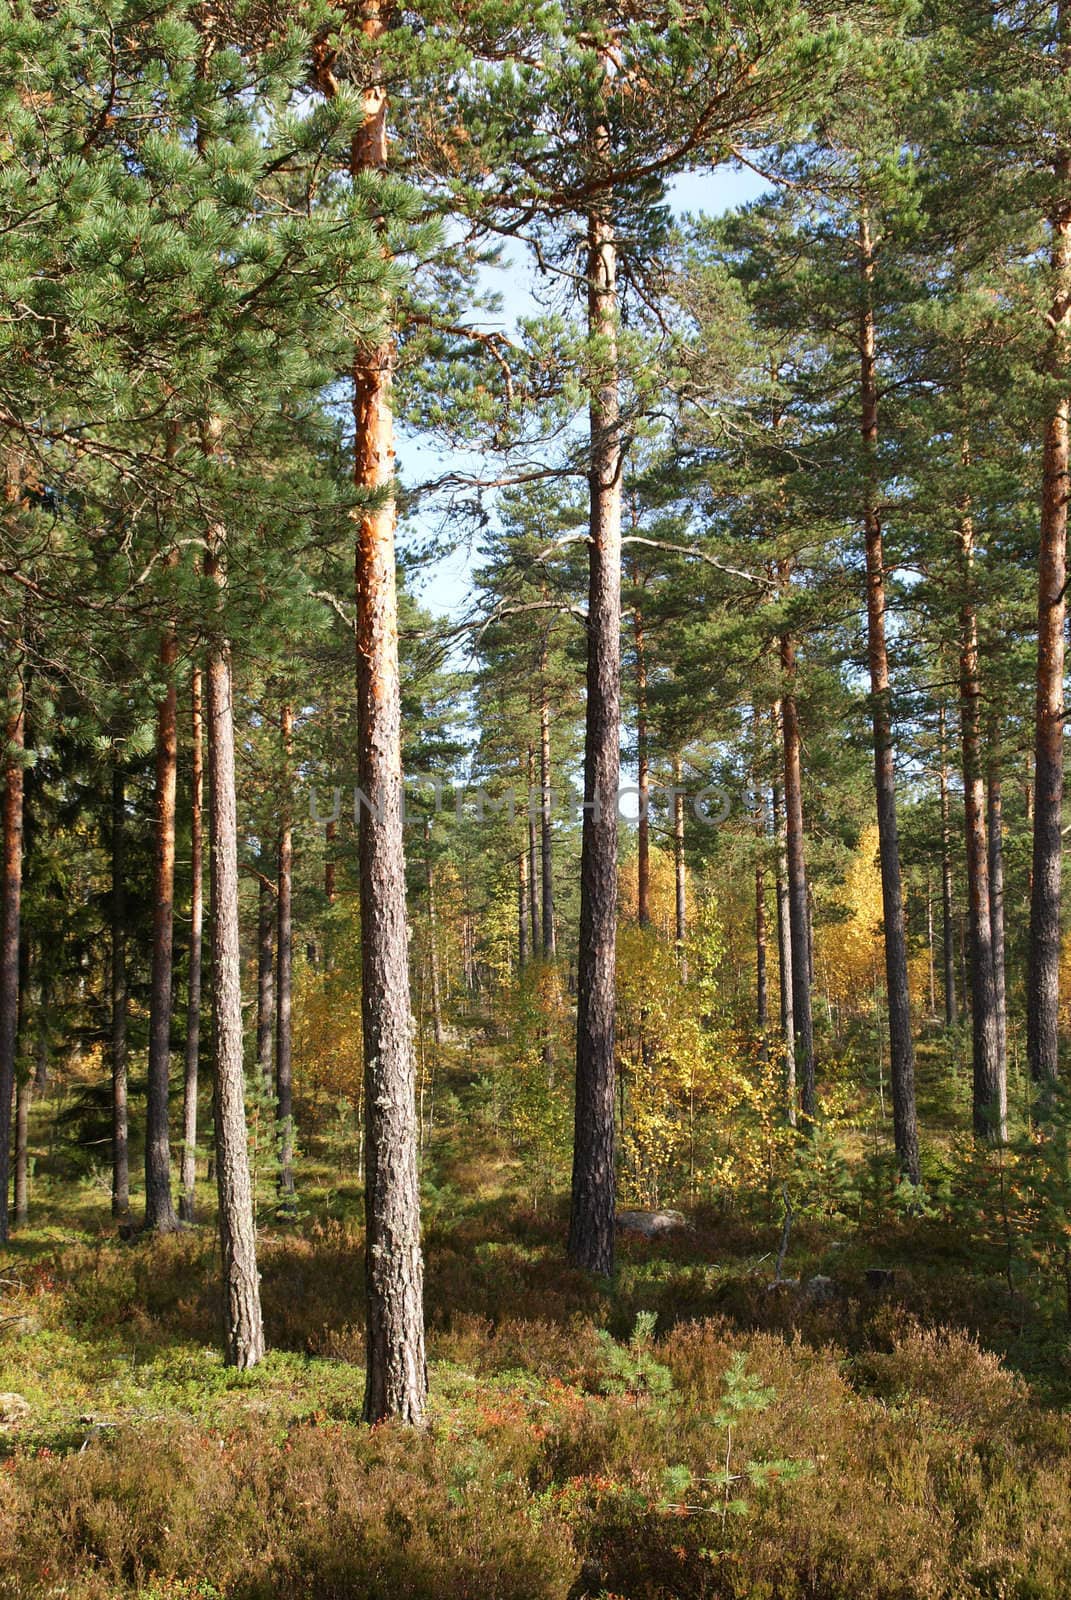 Pine forest in autumn colors. Photographed in Muurla, Finland October 2010.